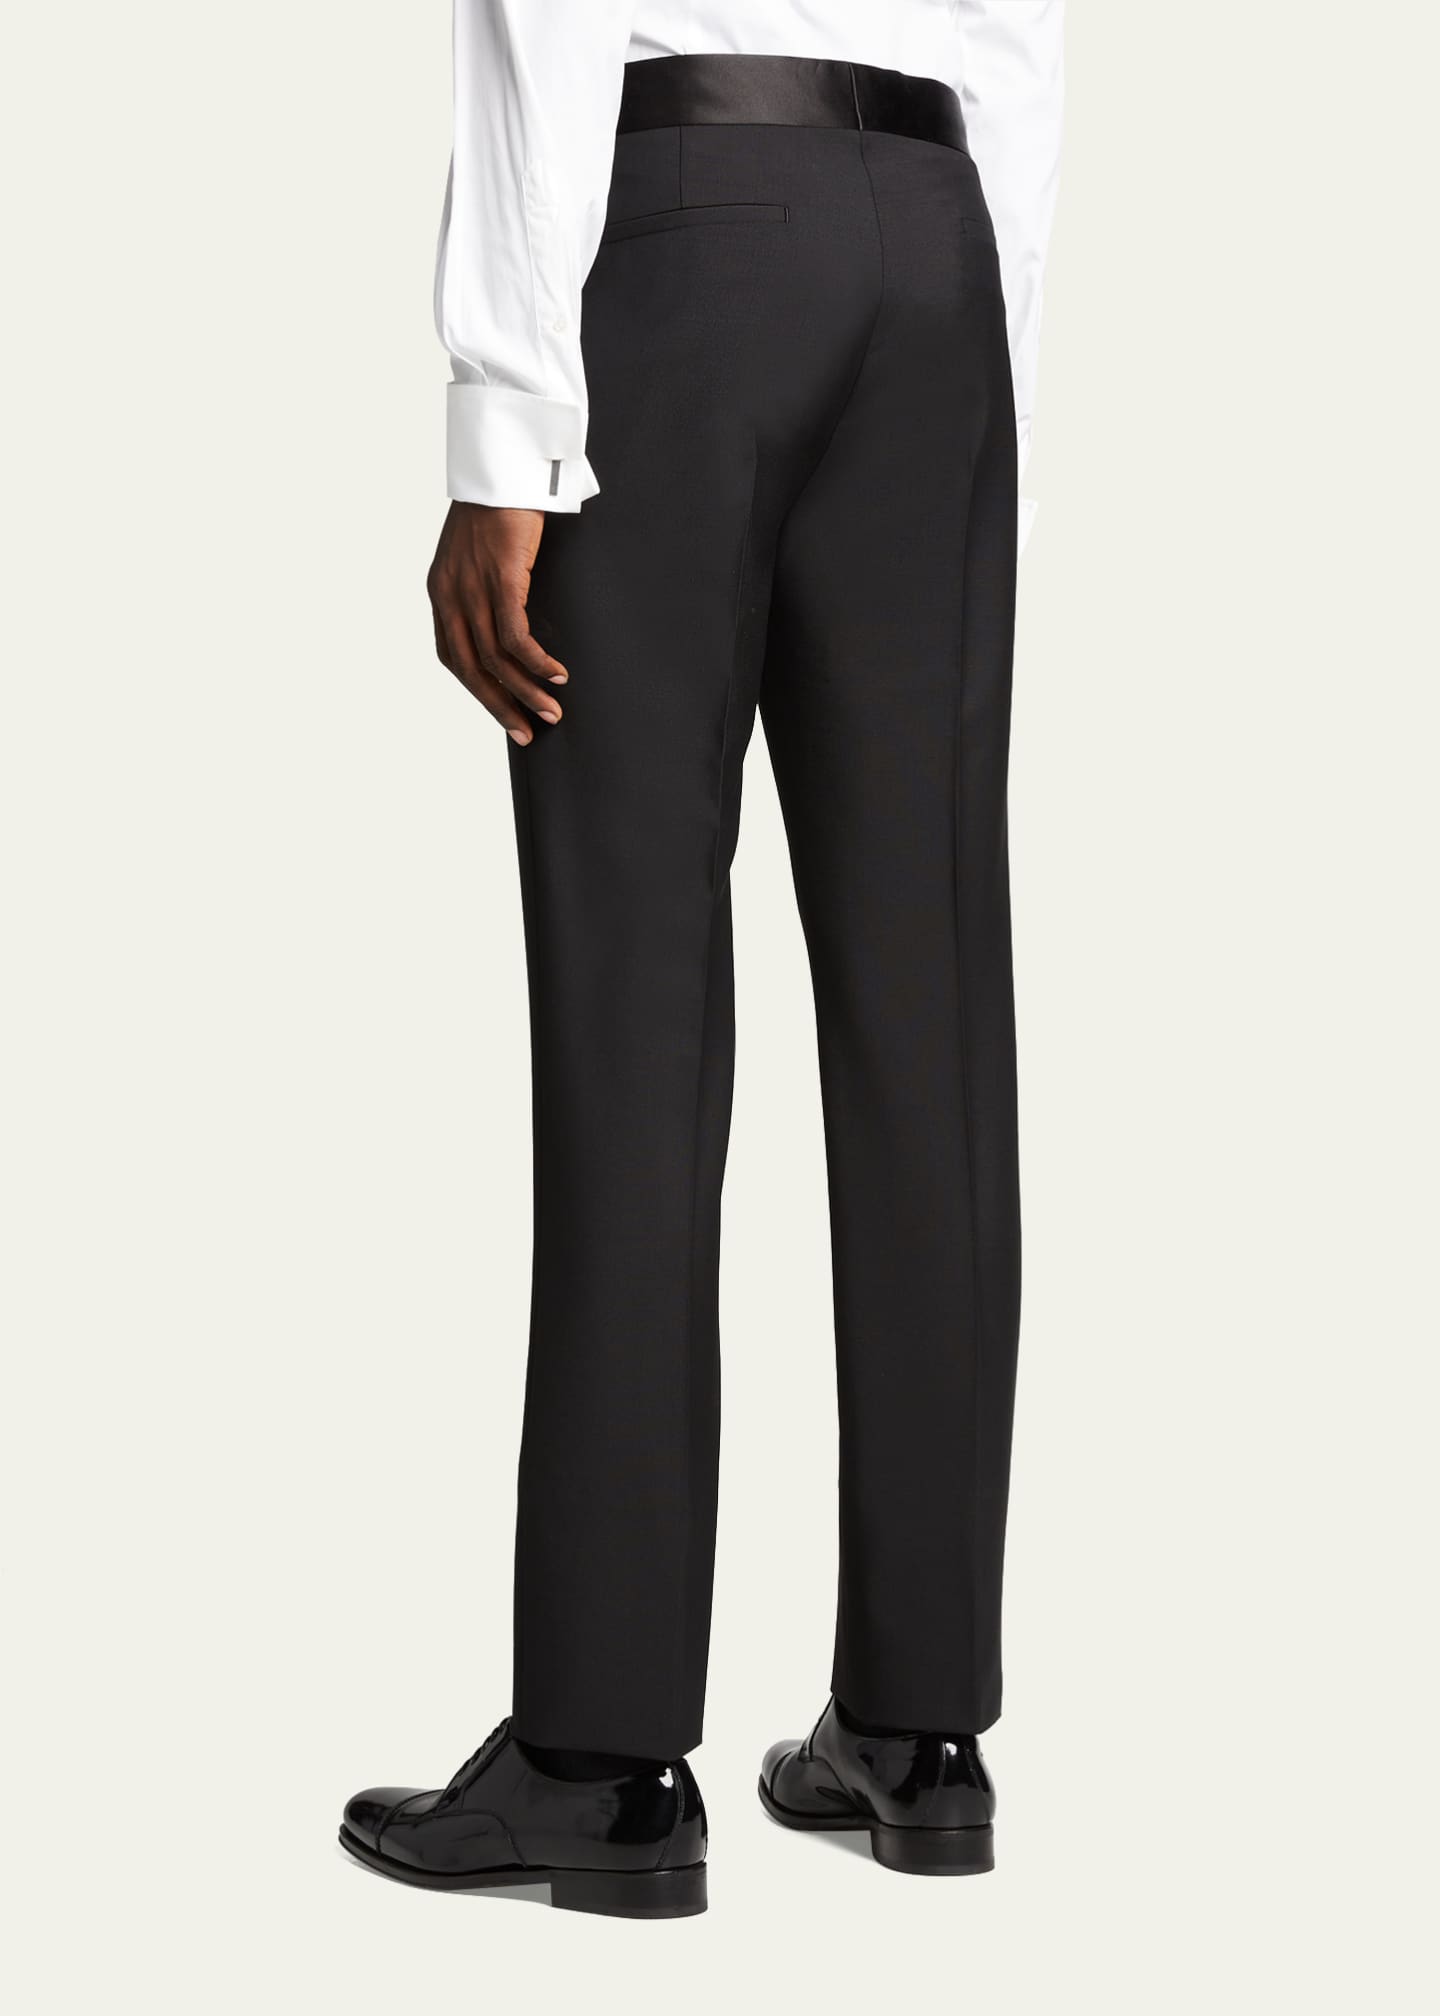 Givenchy Men's Classic-Fit Tuxedo Trousers - Bergdorf Goodman